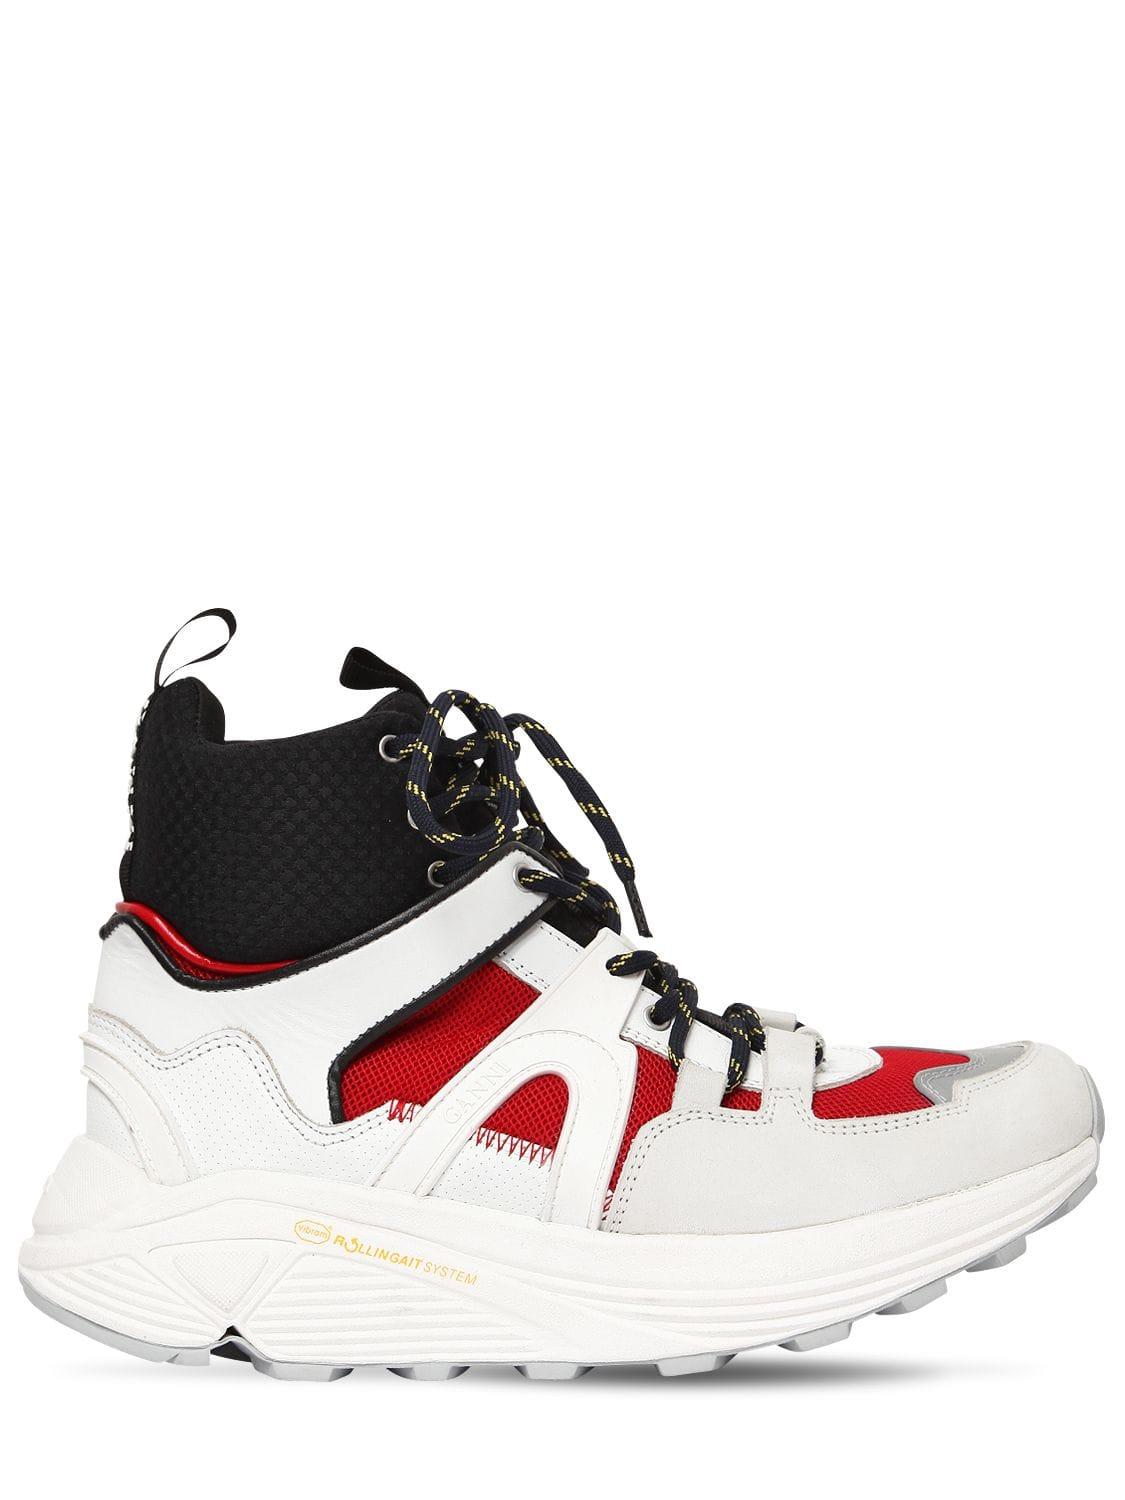 Ganni 30mm Brooklyn Leather High Top Sneakers in White/Black/Red (White) |  Lyst Canada